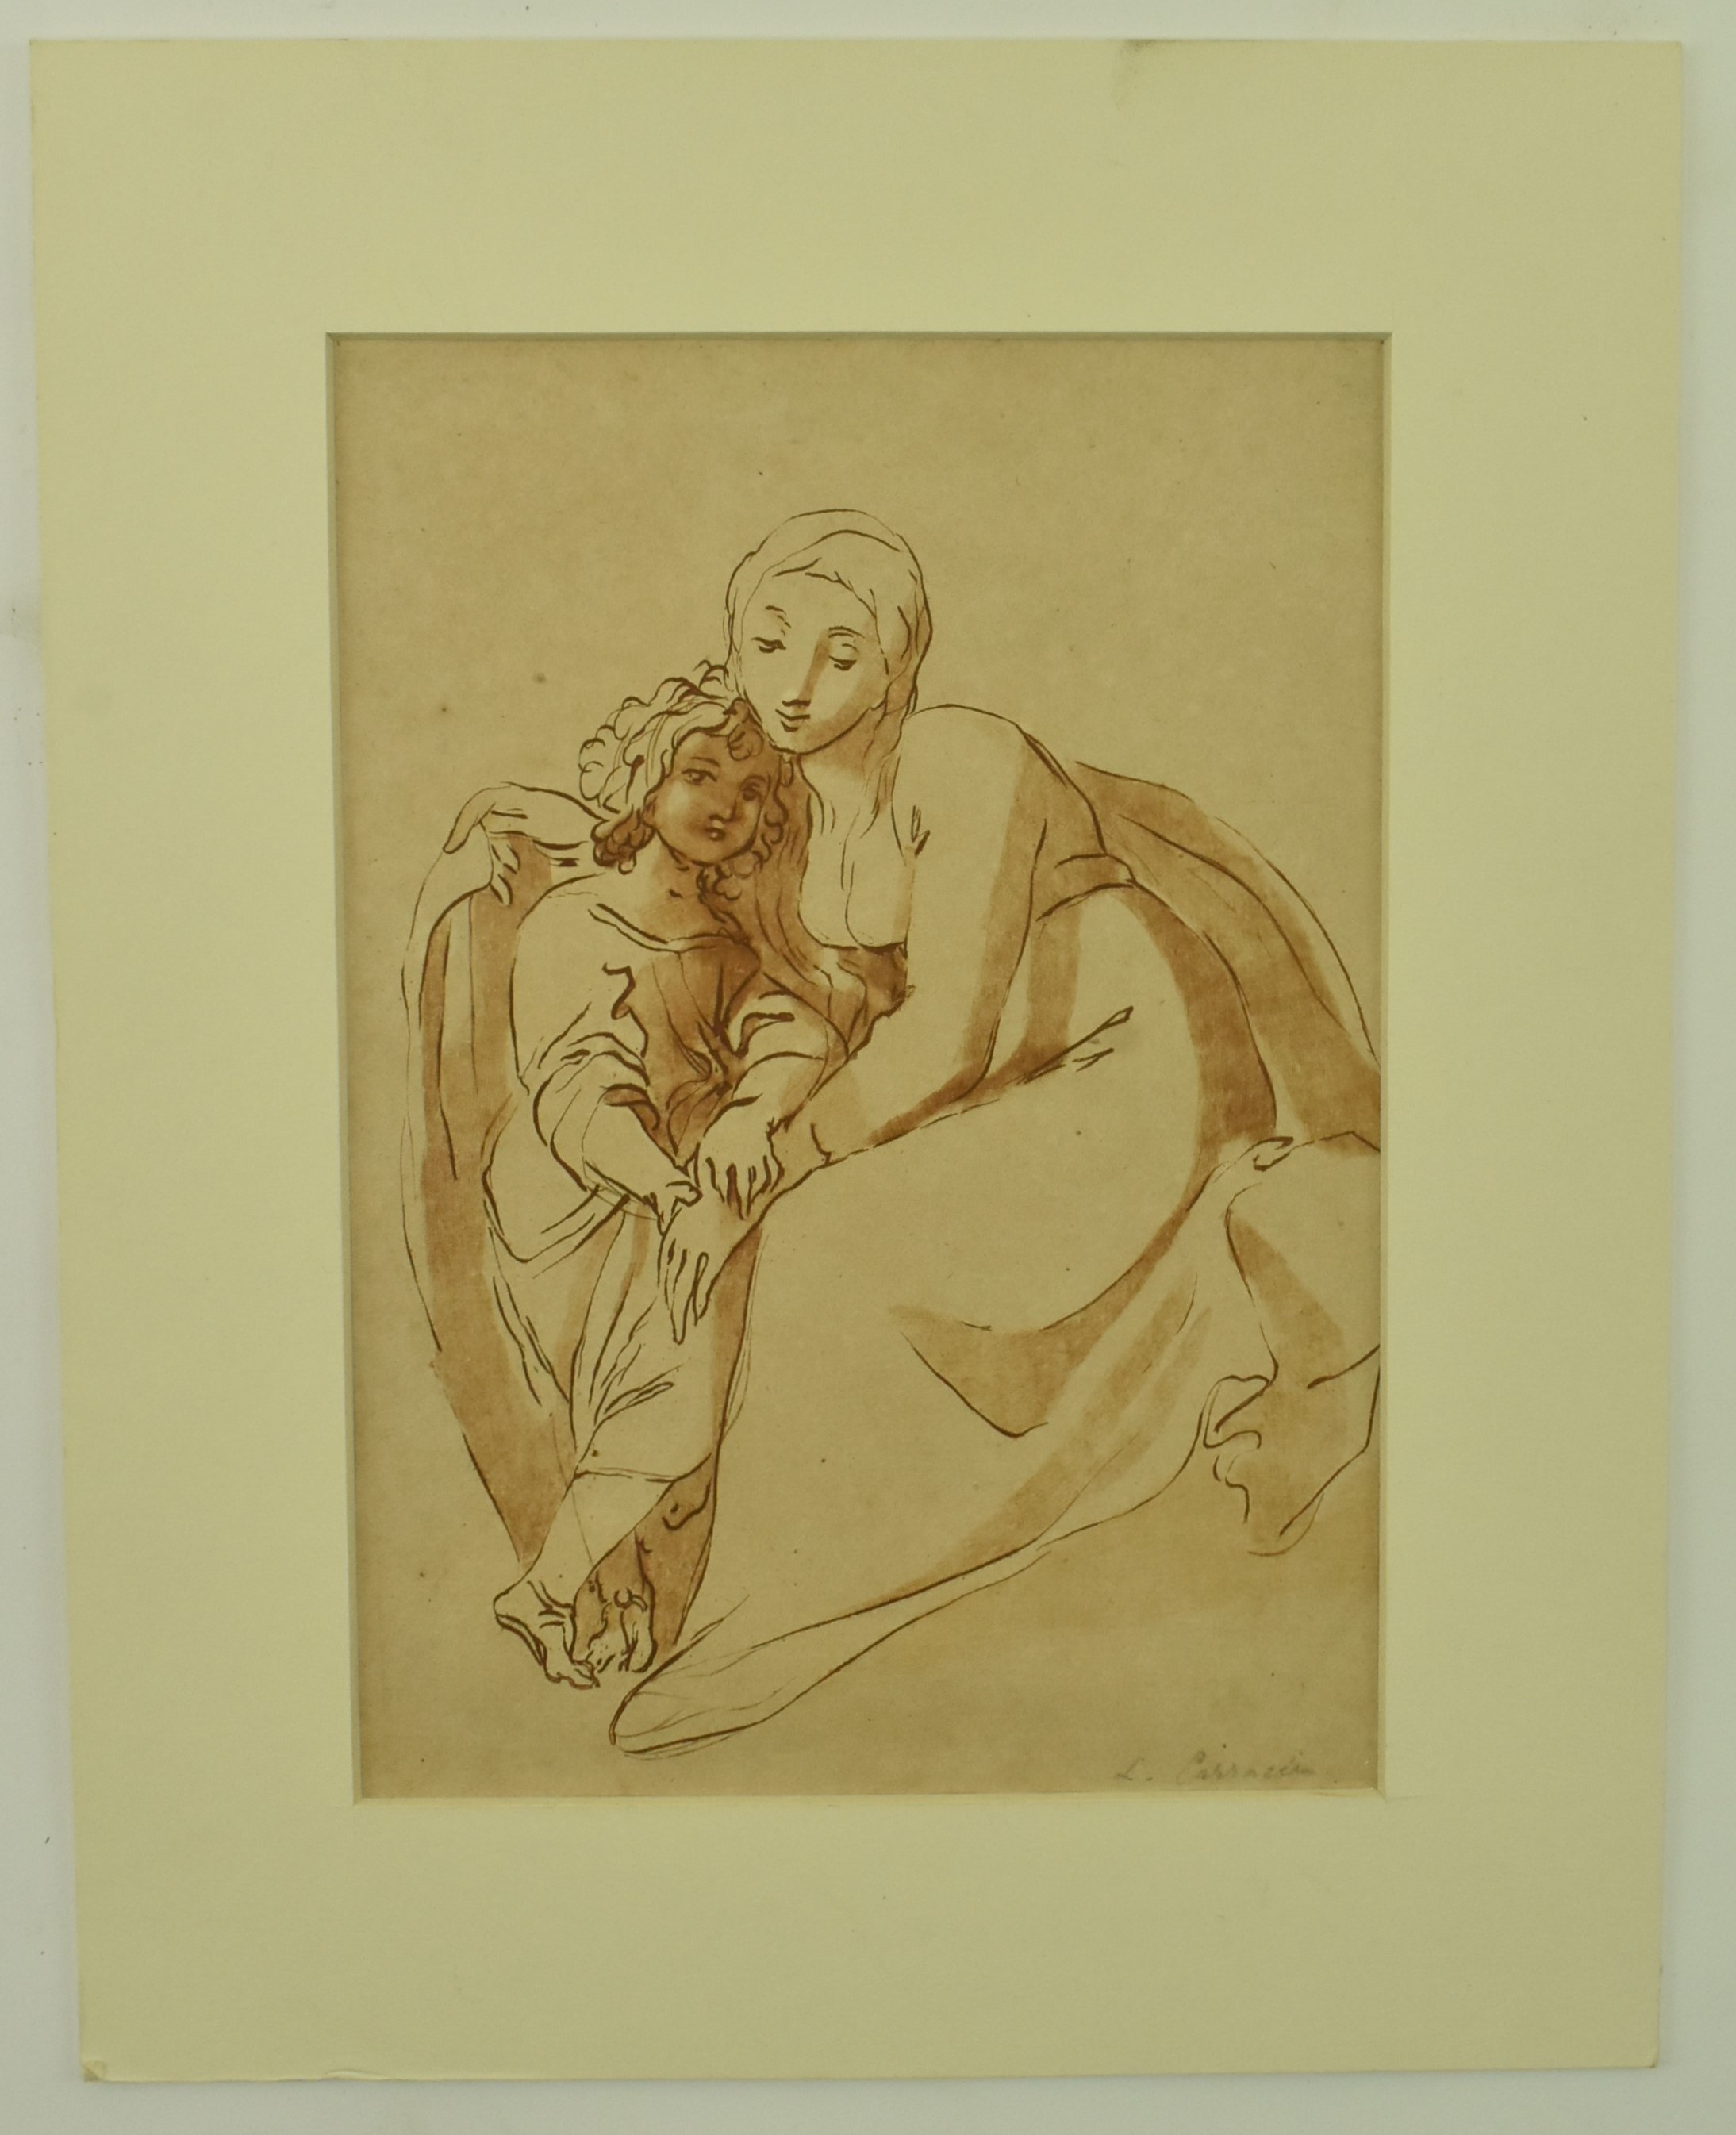 ATTR. LUDOVICO CARRACCI (1555-1619) - STUDY OF MADONNA WITH CHILD - Image 2 of 4